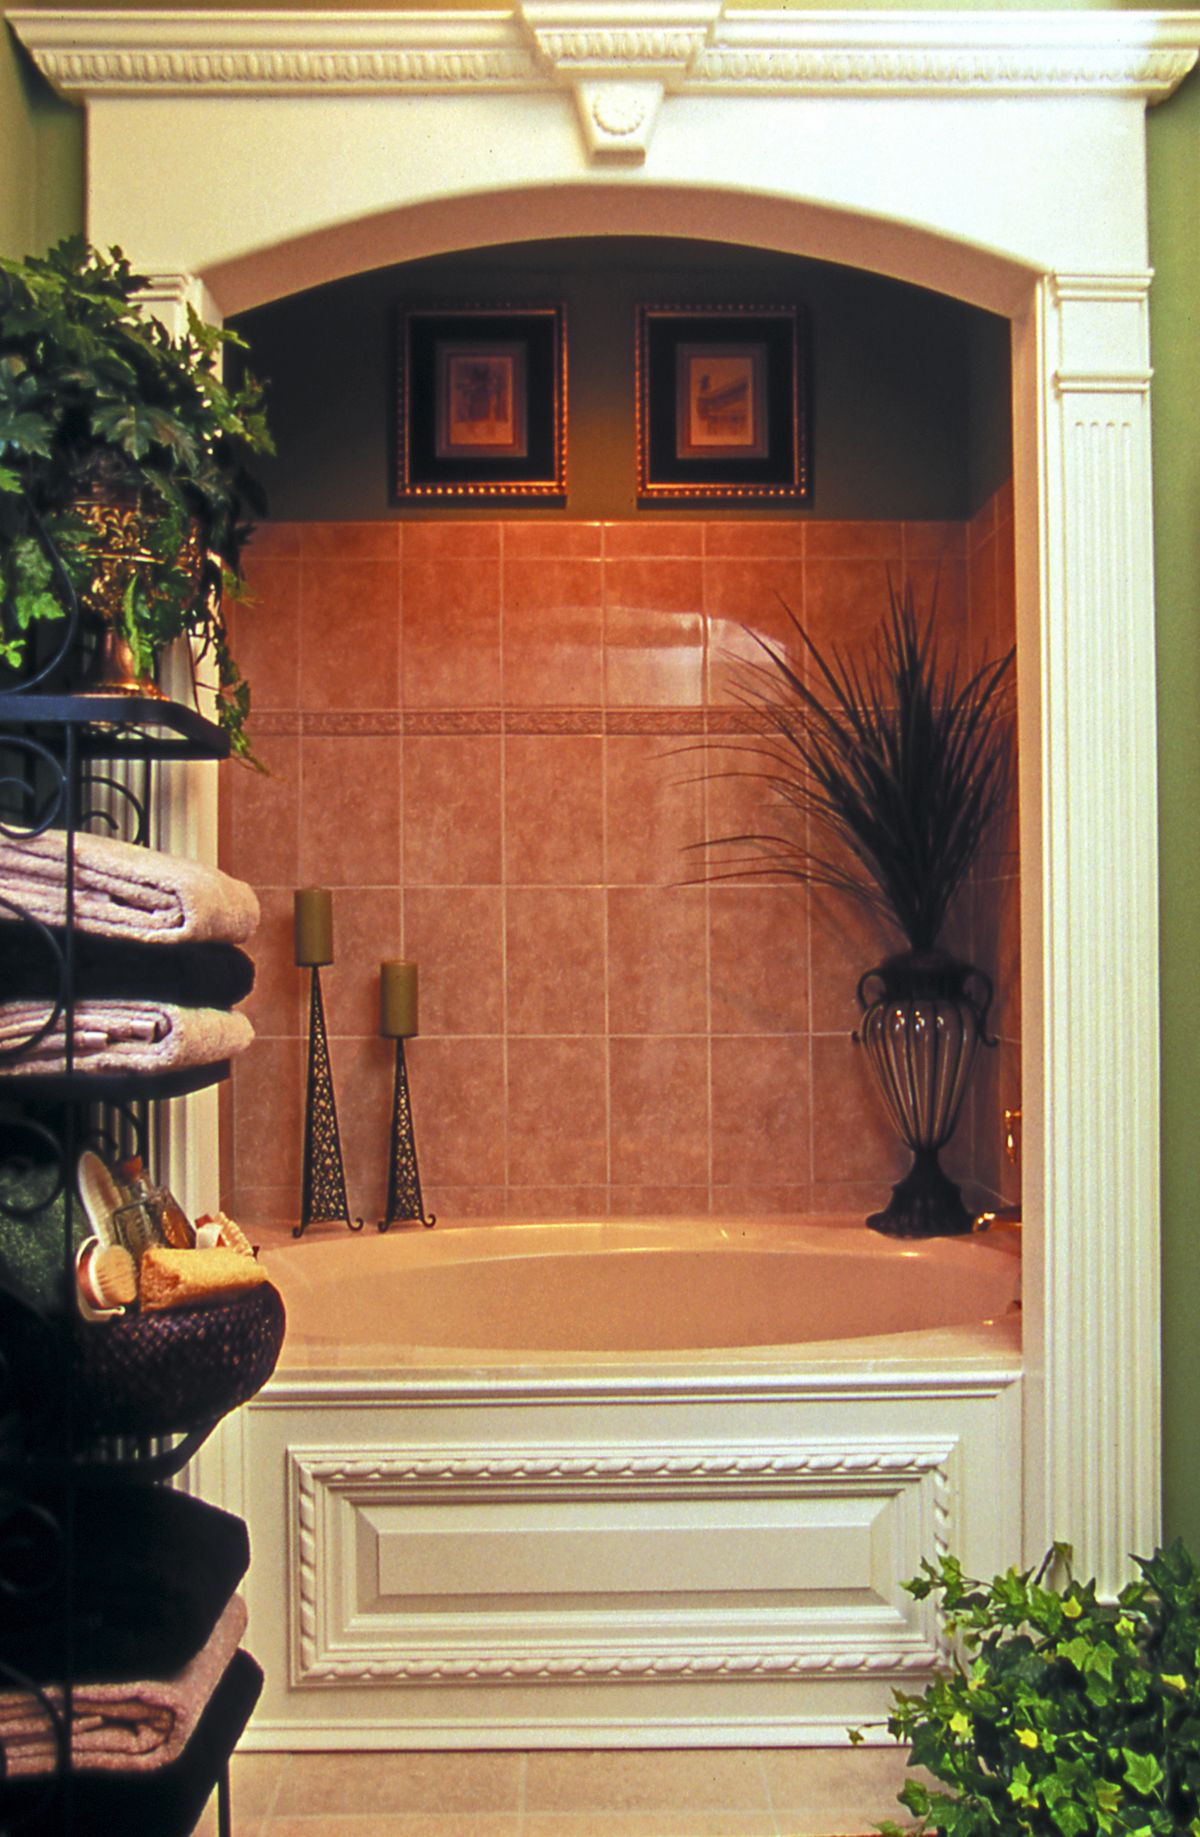 Atlanta-area resident Phoebe Taylor added architectural details to enhance her master bath. (Associated Press)